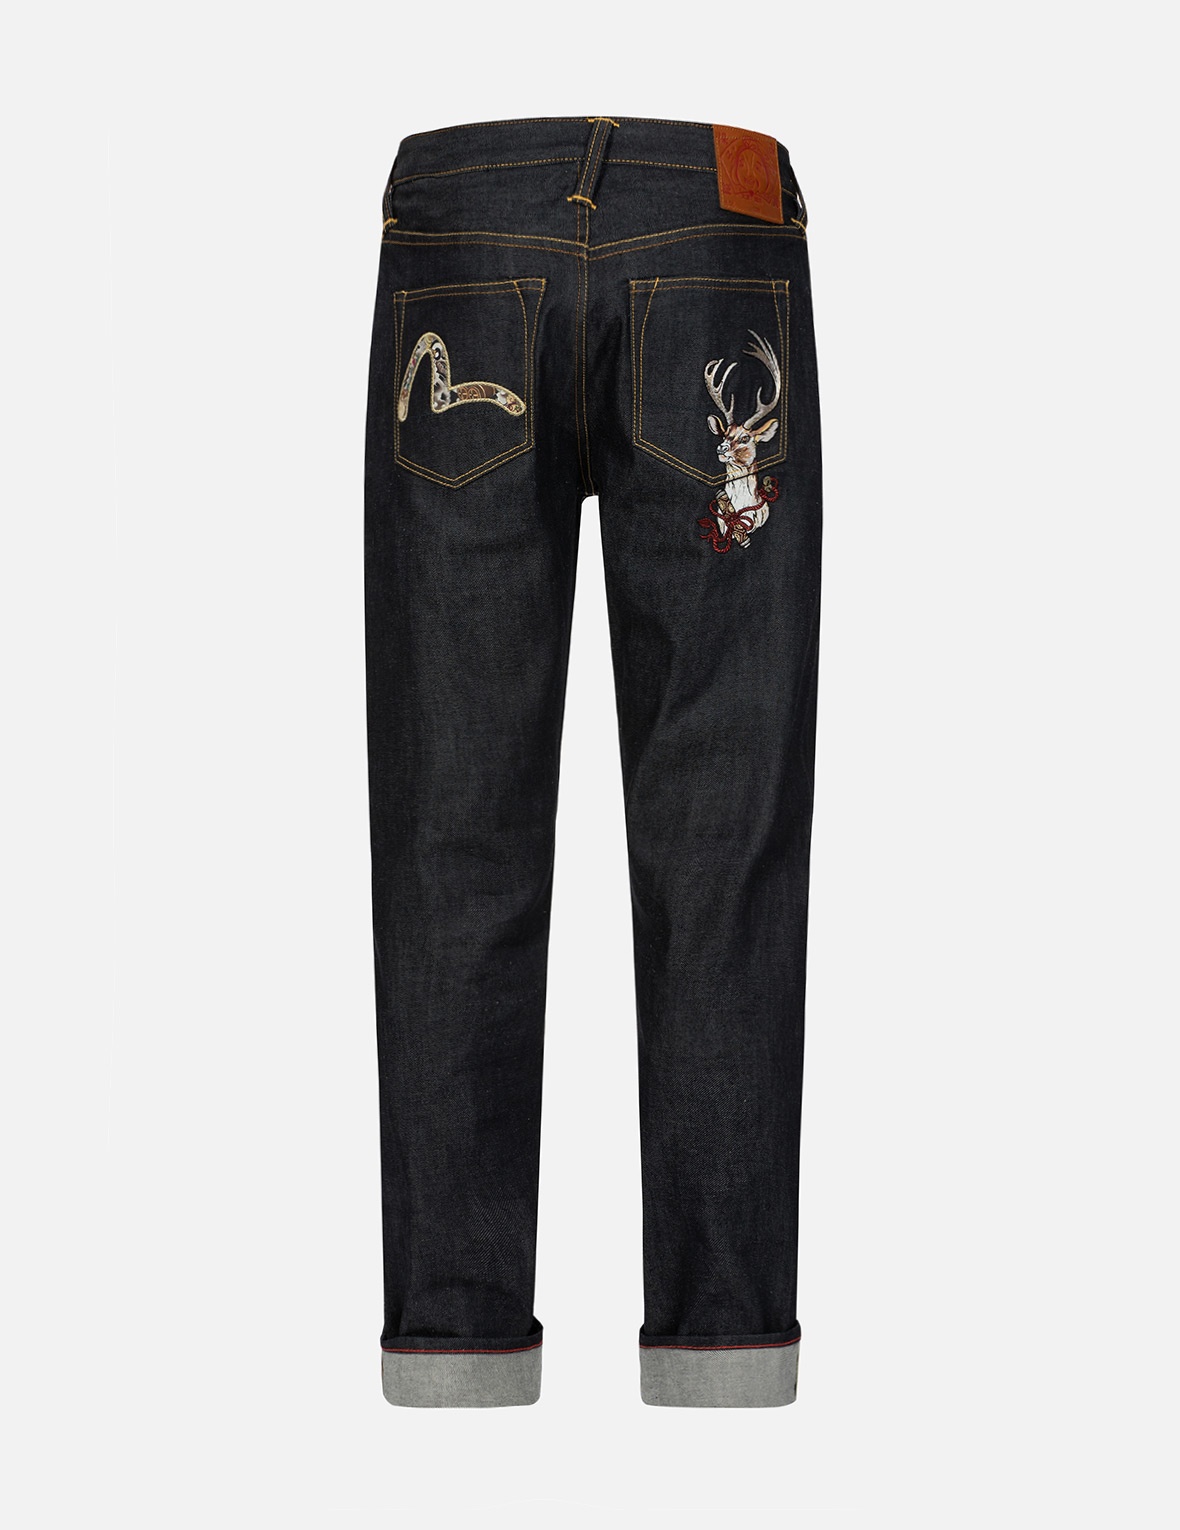 DEER AND SEAGULL EMBROIDERY SLIM FIT SELVEDGE DENIM JEANS #2010 - 1